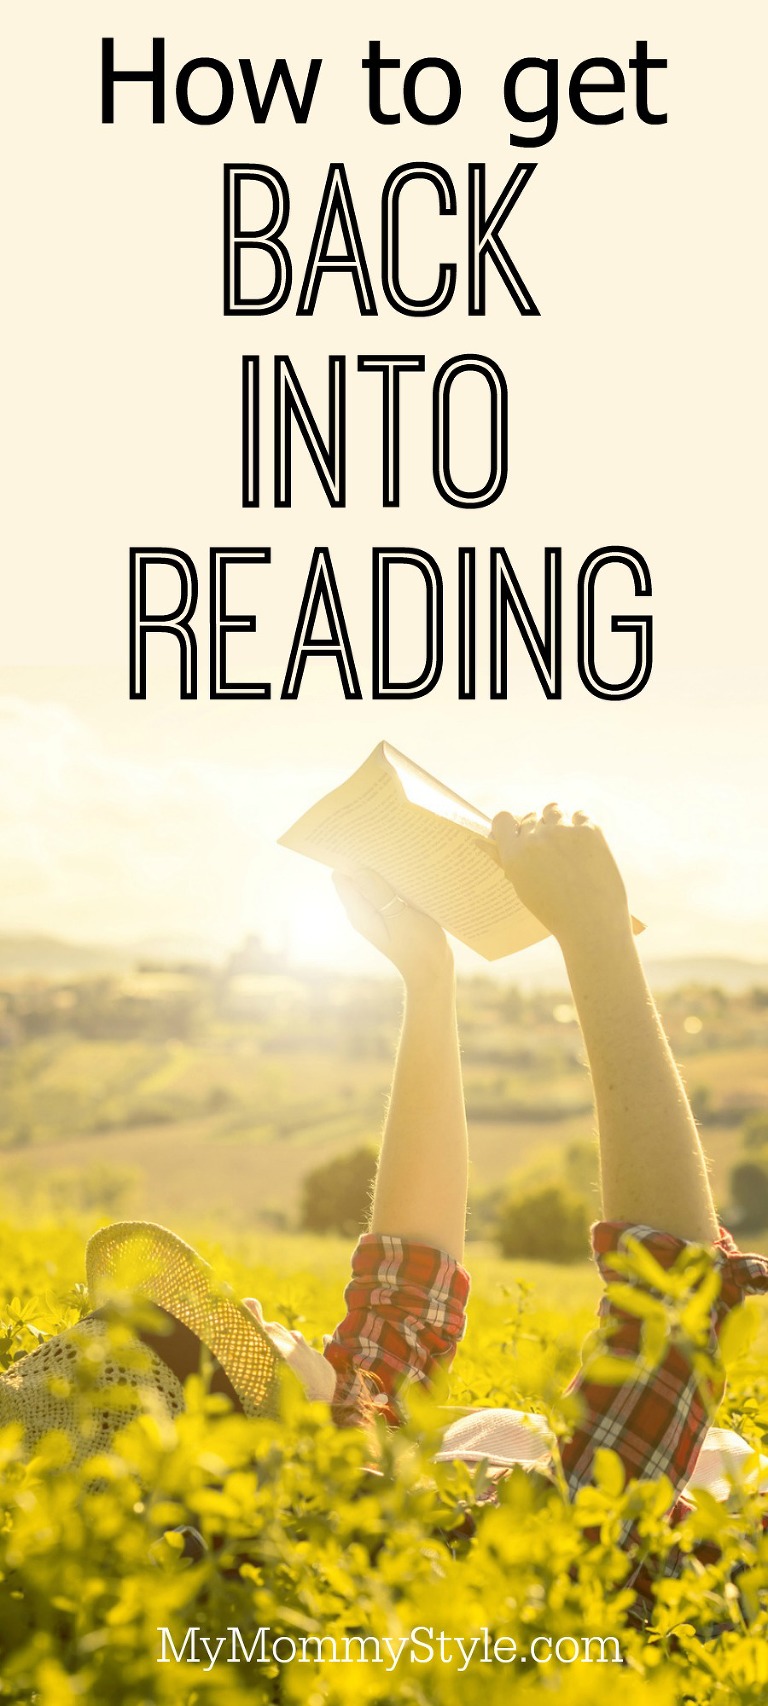 How to get back into reading